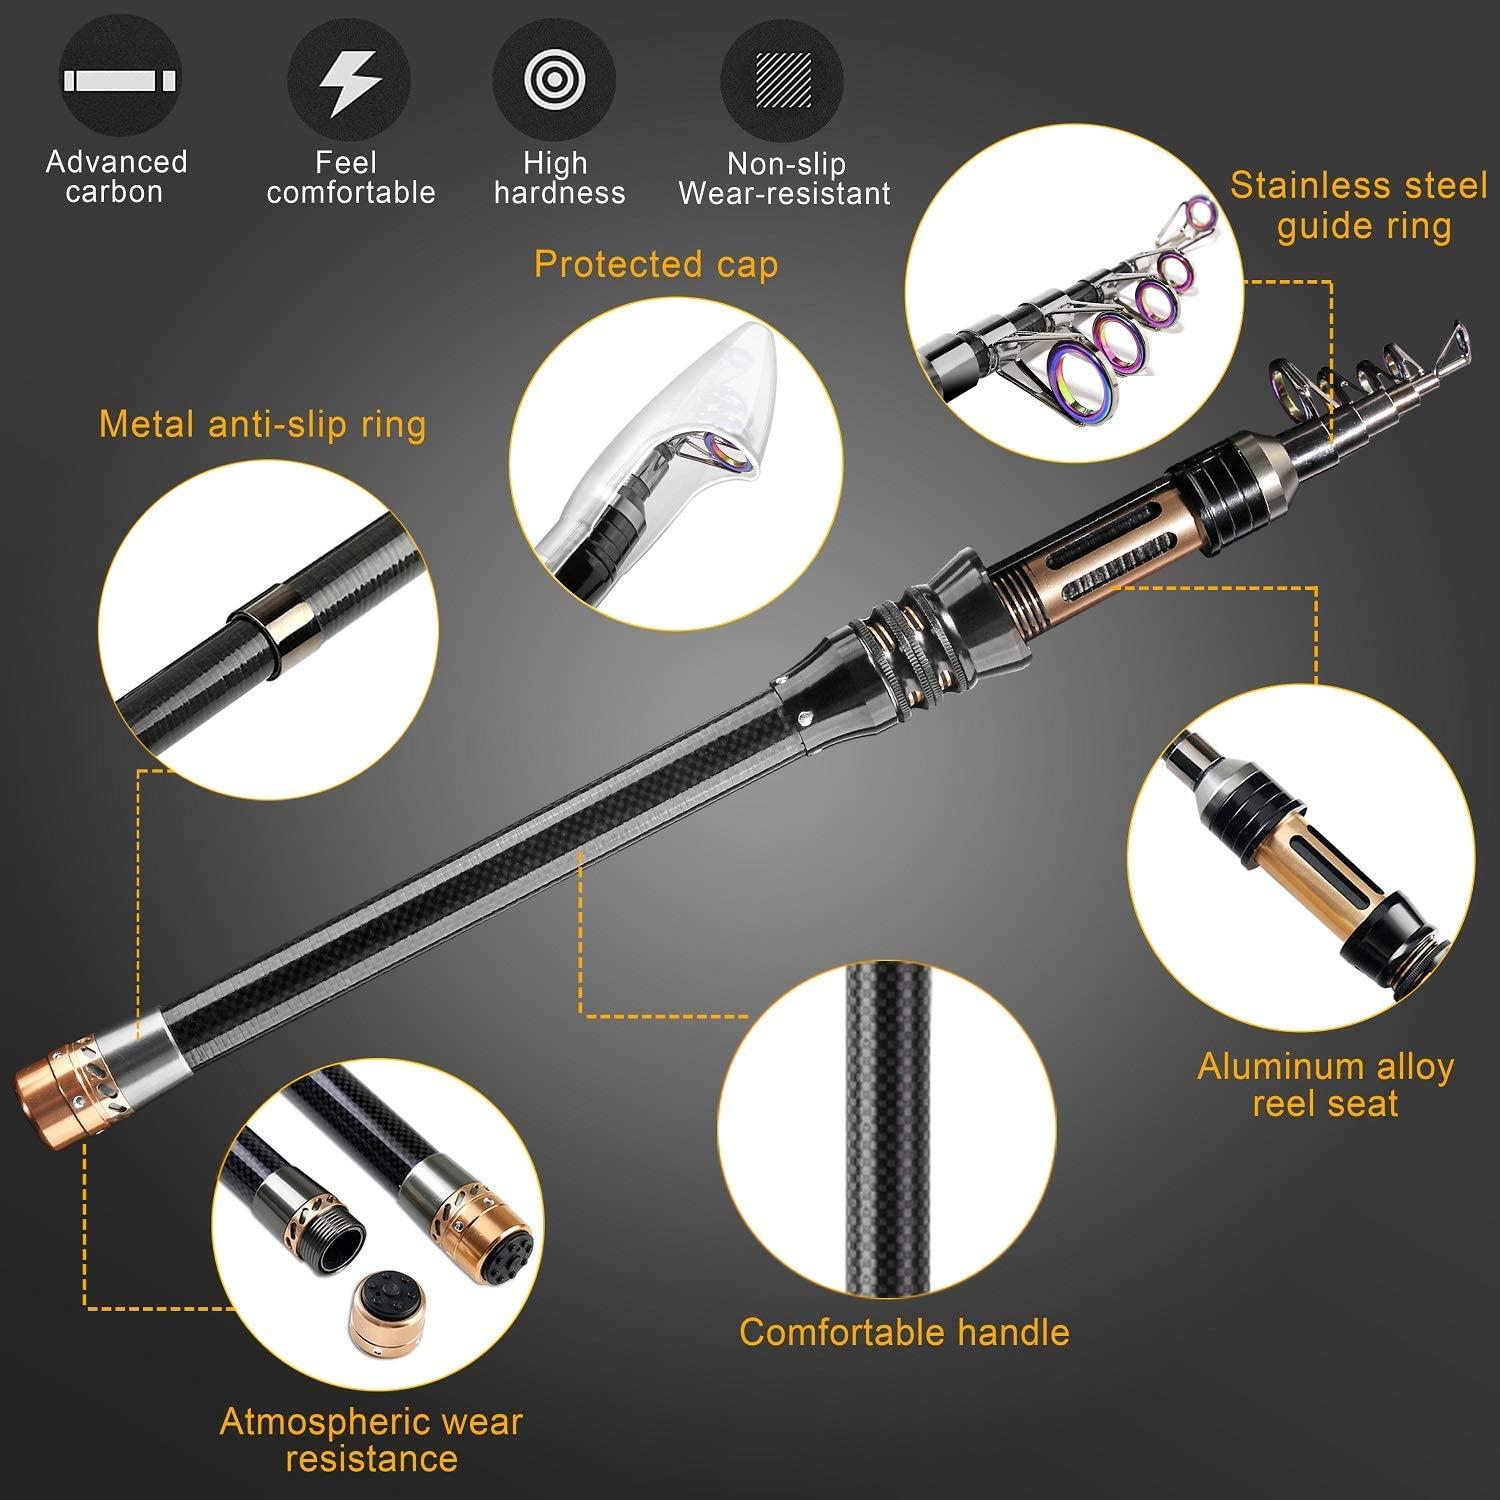 BlueFire Fishing Rod Kit, Carbon Fiber Telescopic Fishing Pole and Reel  Combo with Spinning Reel, Line, Lure, Hooks and Carrier Bag, Fishing Gear  Set for Beginner Adults Saltwater Freshwater 2.1M